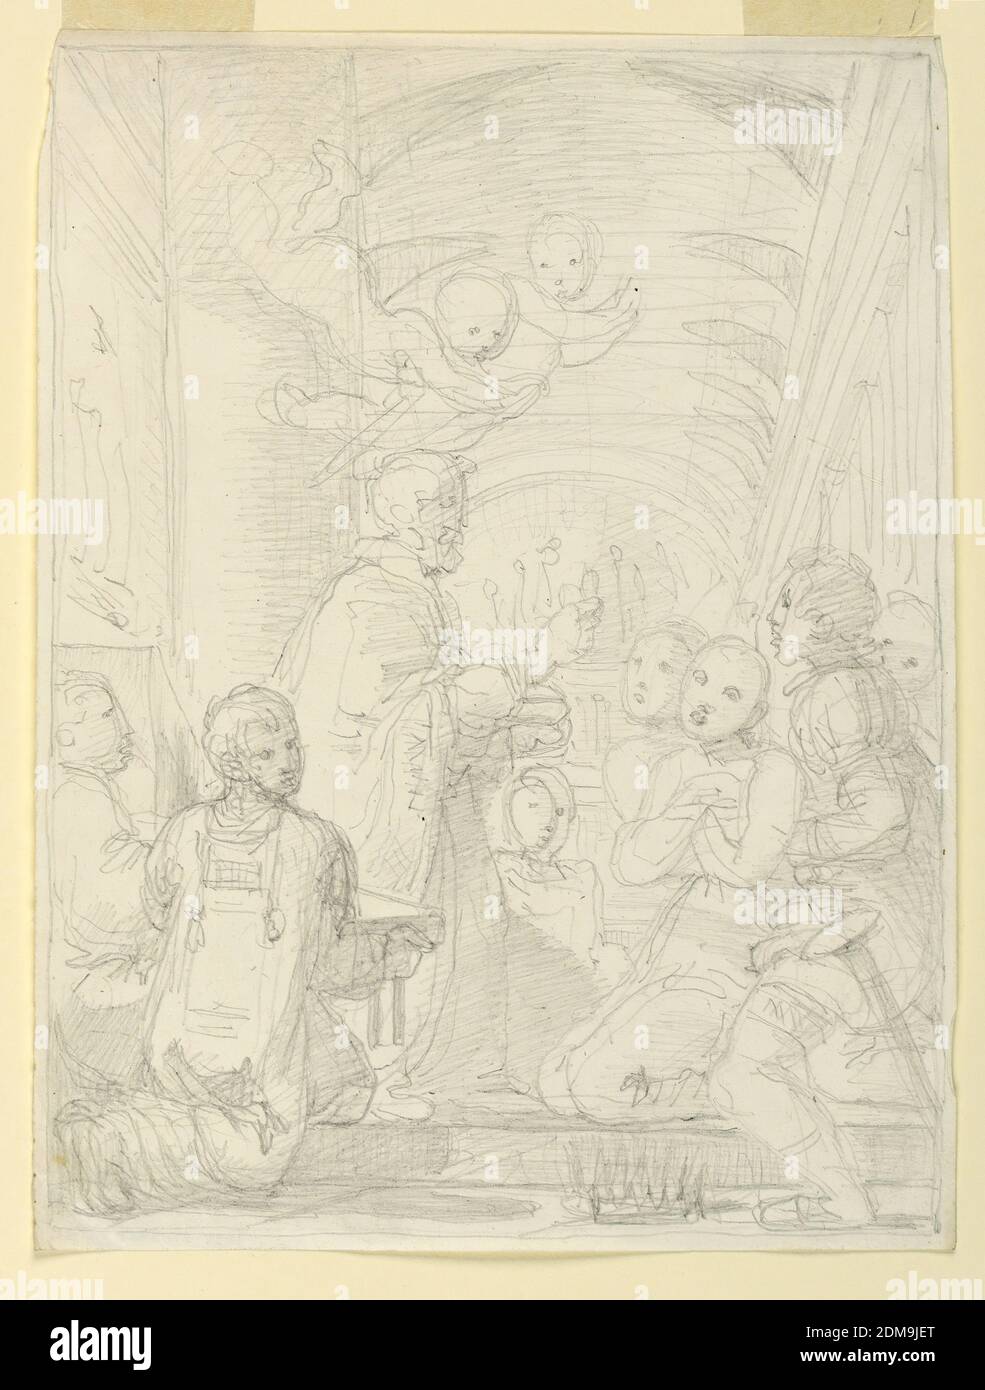 Saint or Ecclesiastic Figure Administering Communion, Fortunato Duranti, Italian, 1787 - 1863, Graphite on paper, Saint or Ecclesiastic Figure Administering Communion. Putti fly above, attendants at lower left, and worshippers at right receiving the bread., Rome, Italy, 1820–1850, Drawing Stock Photo